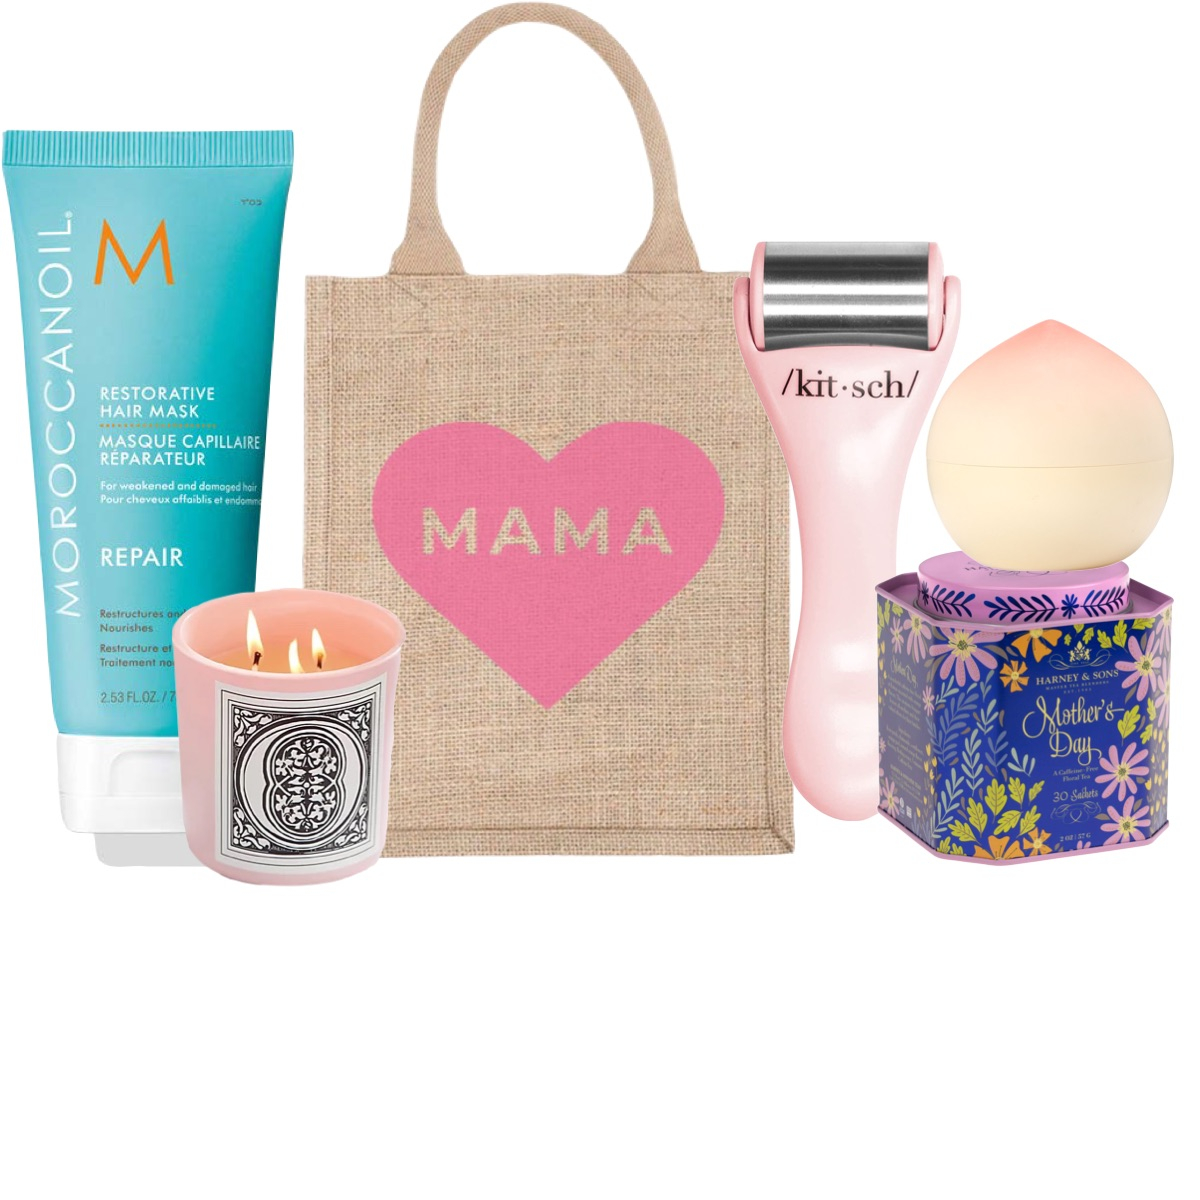 26 Mother's Day gifts for every kind of mom — starting at $8